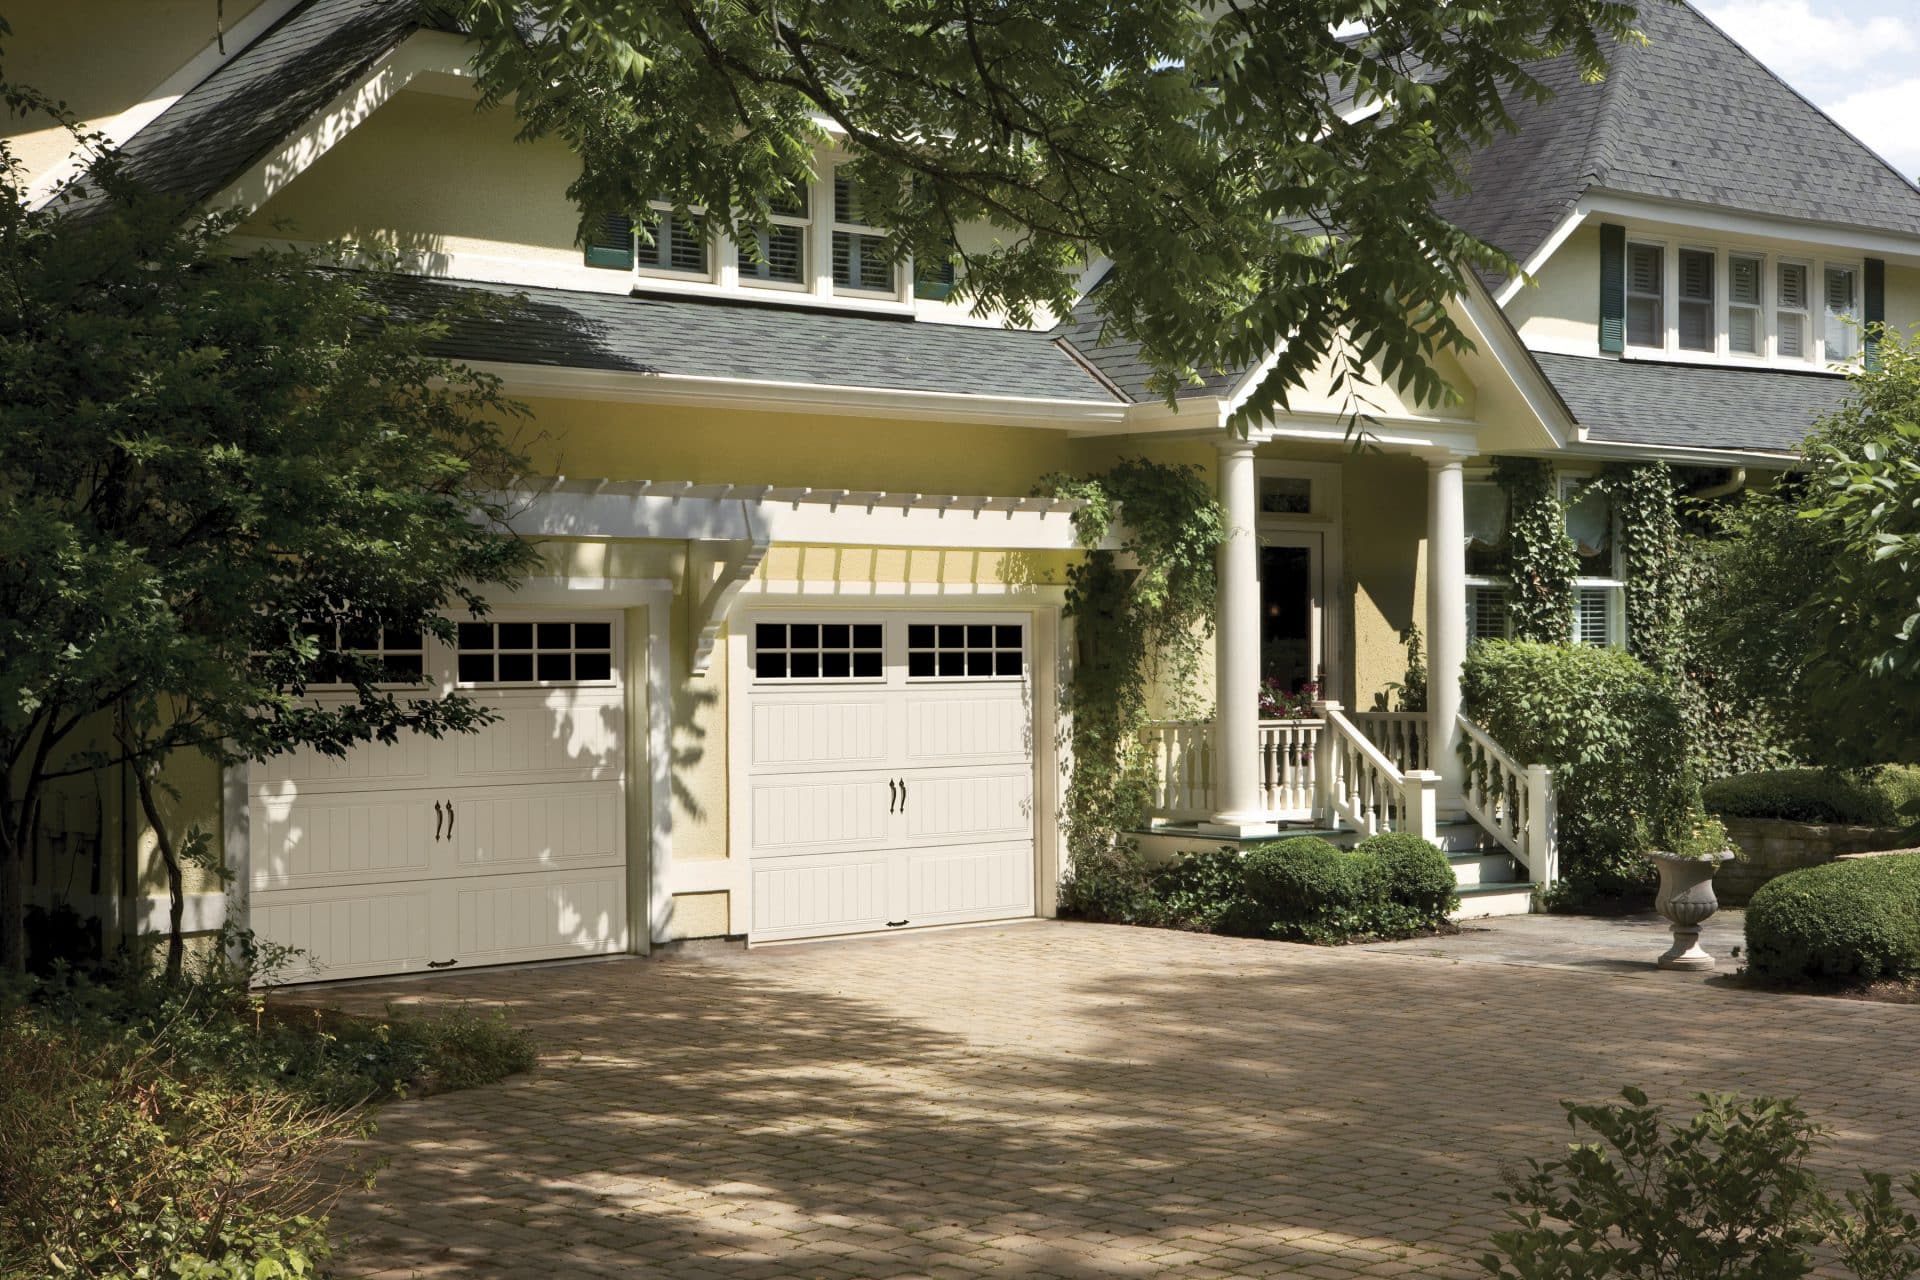 House with white garage doors